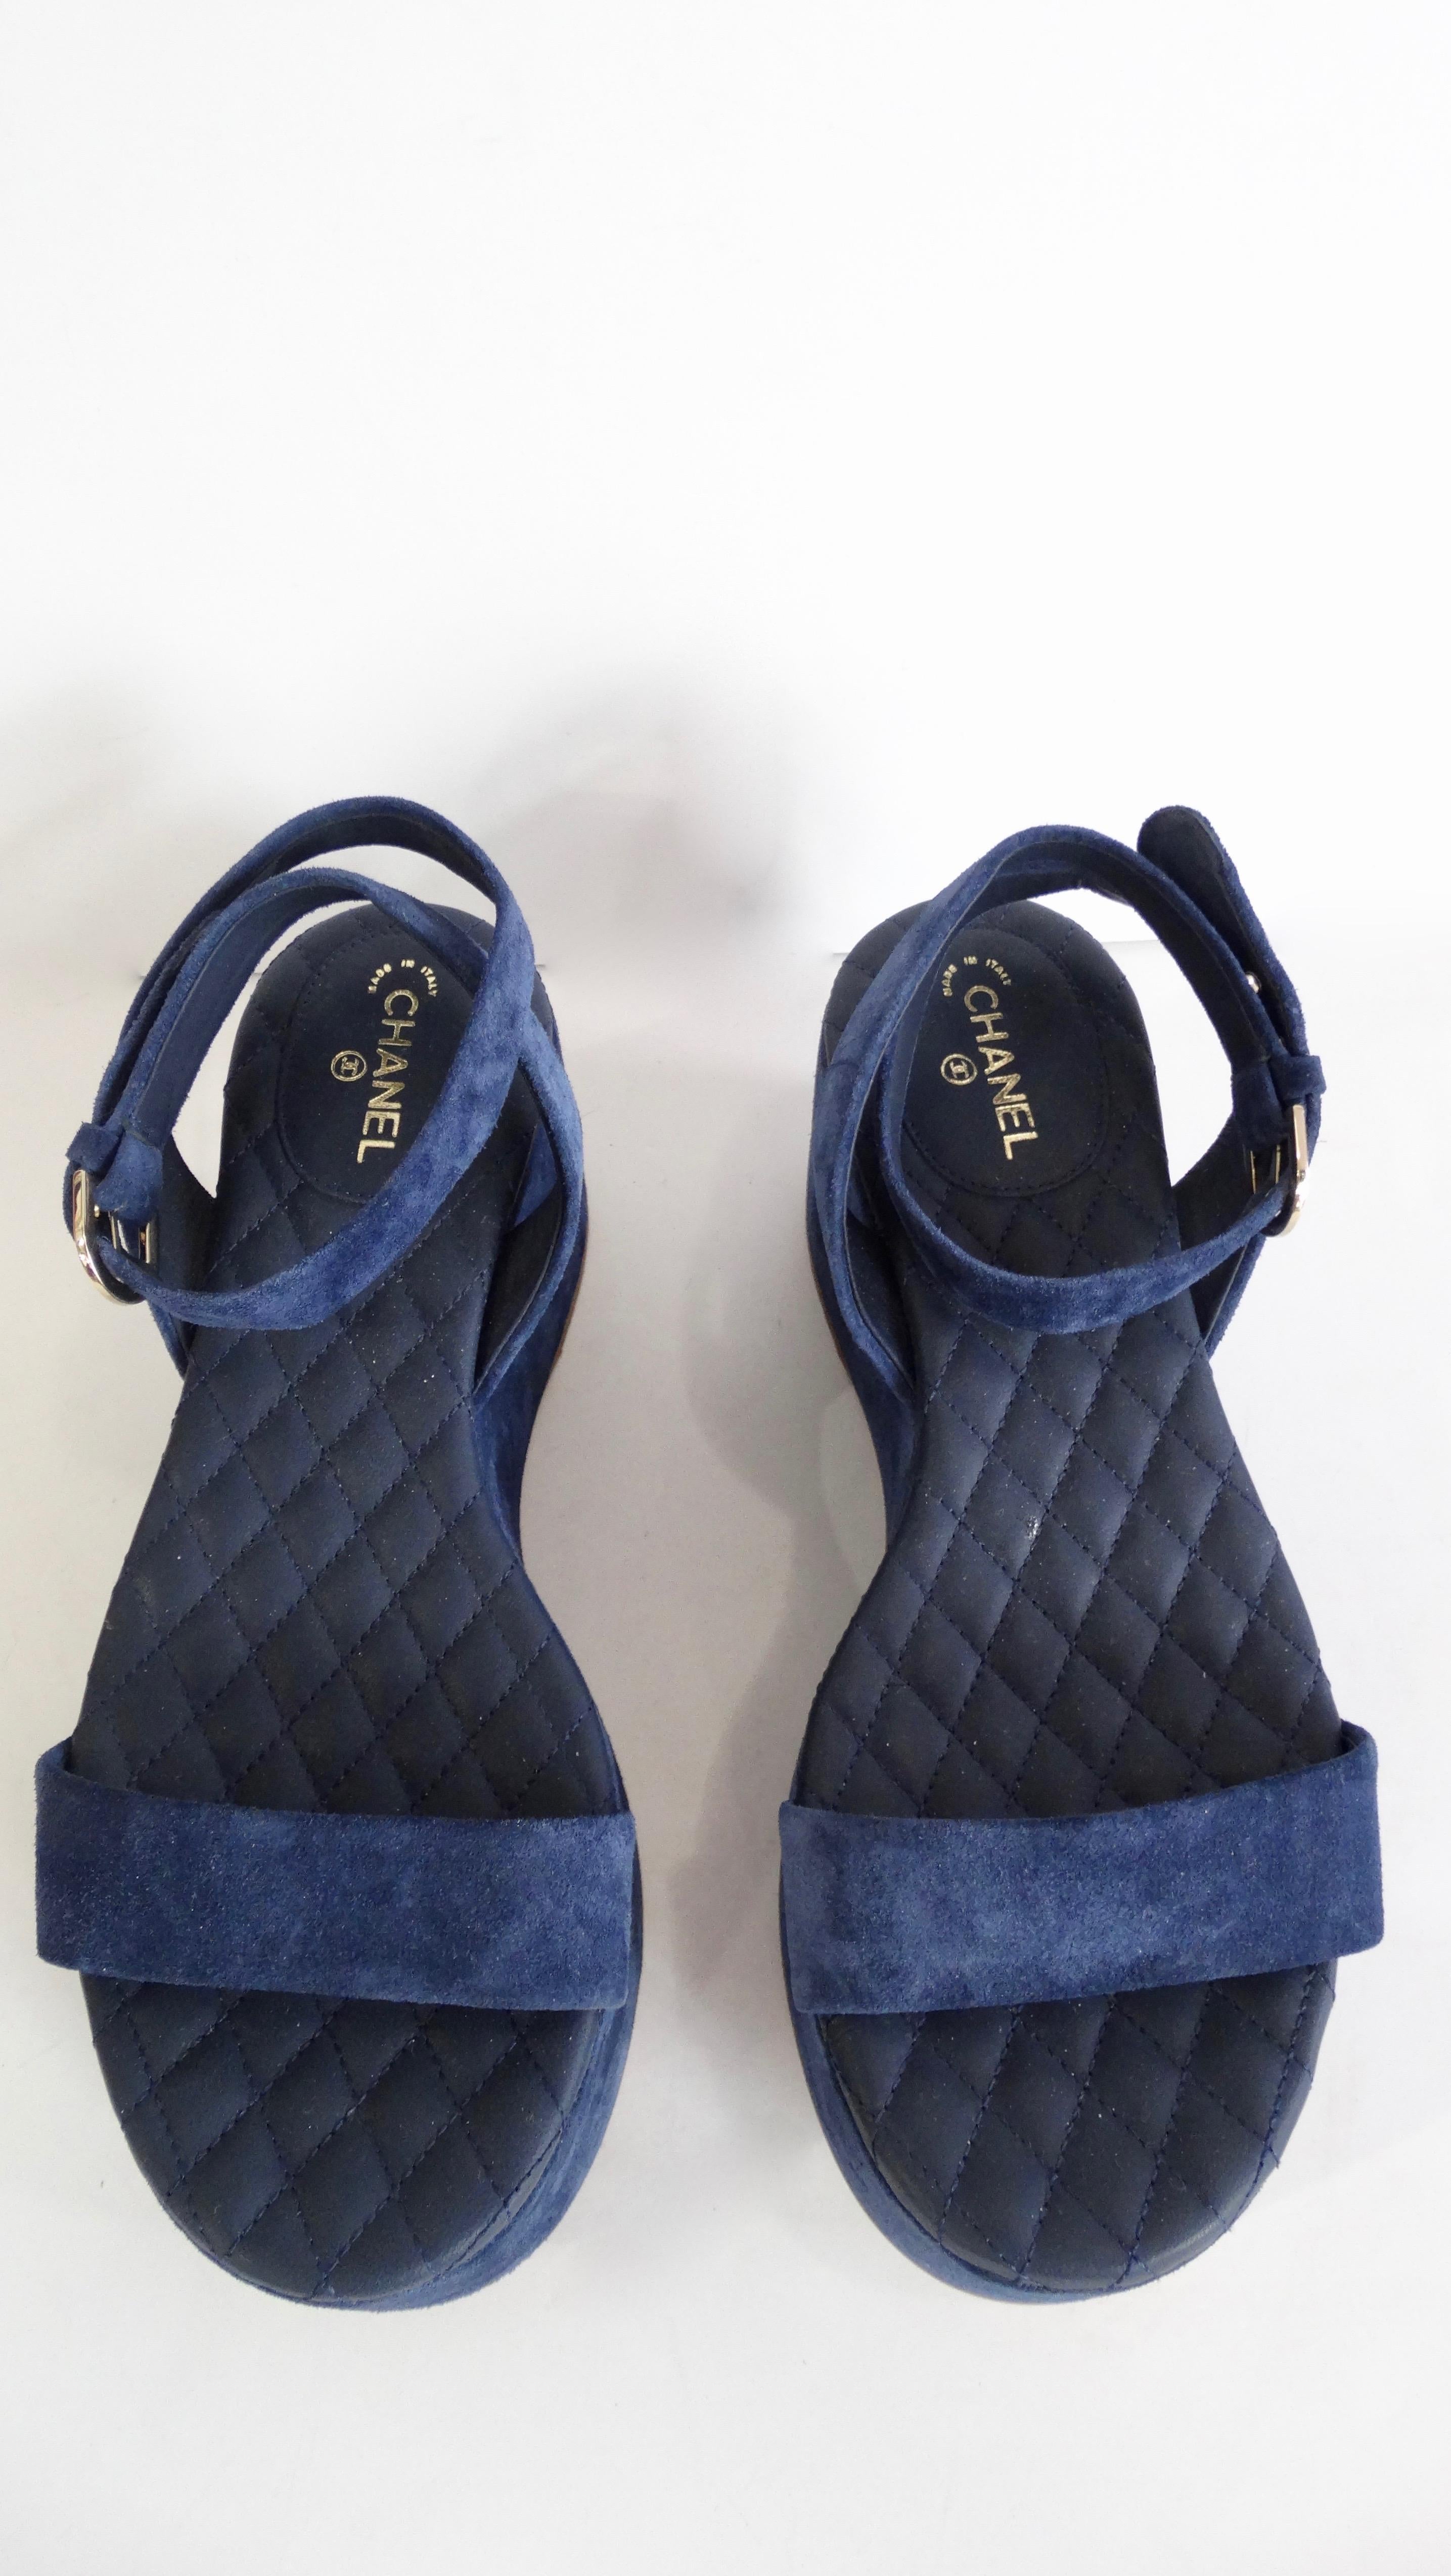 Take a walk with Chanel! Circa 2015, these platform sandals are made of blue suede and feature the signature Chanel quilting on the insole. Includes a CC logo at the heel and a wrap ankle strap with a 